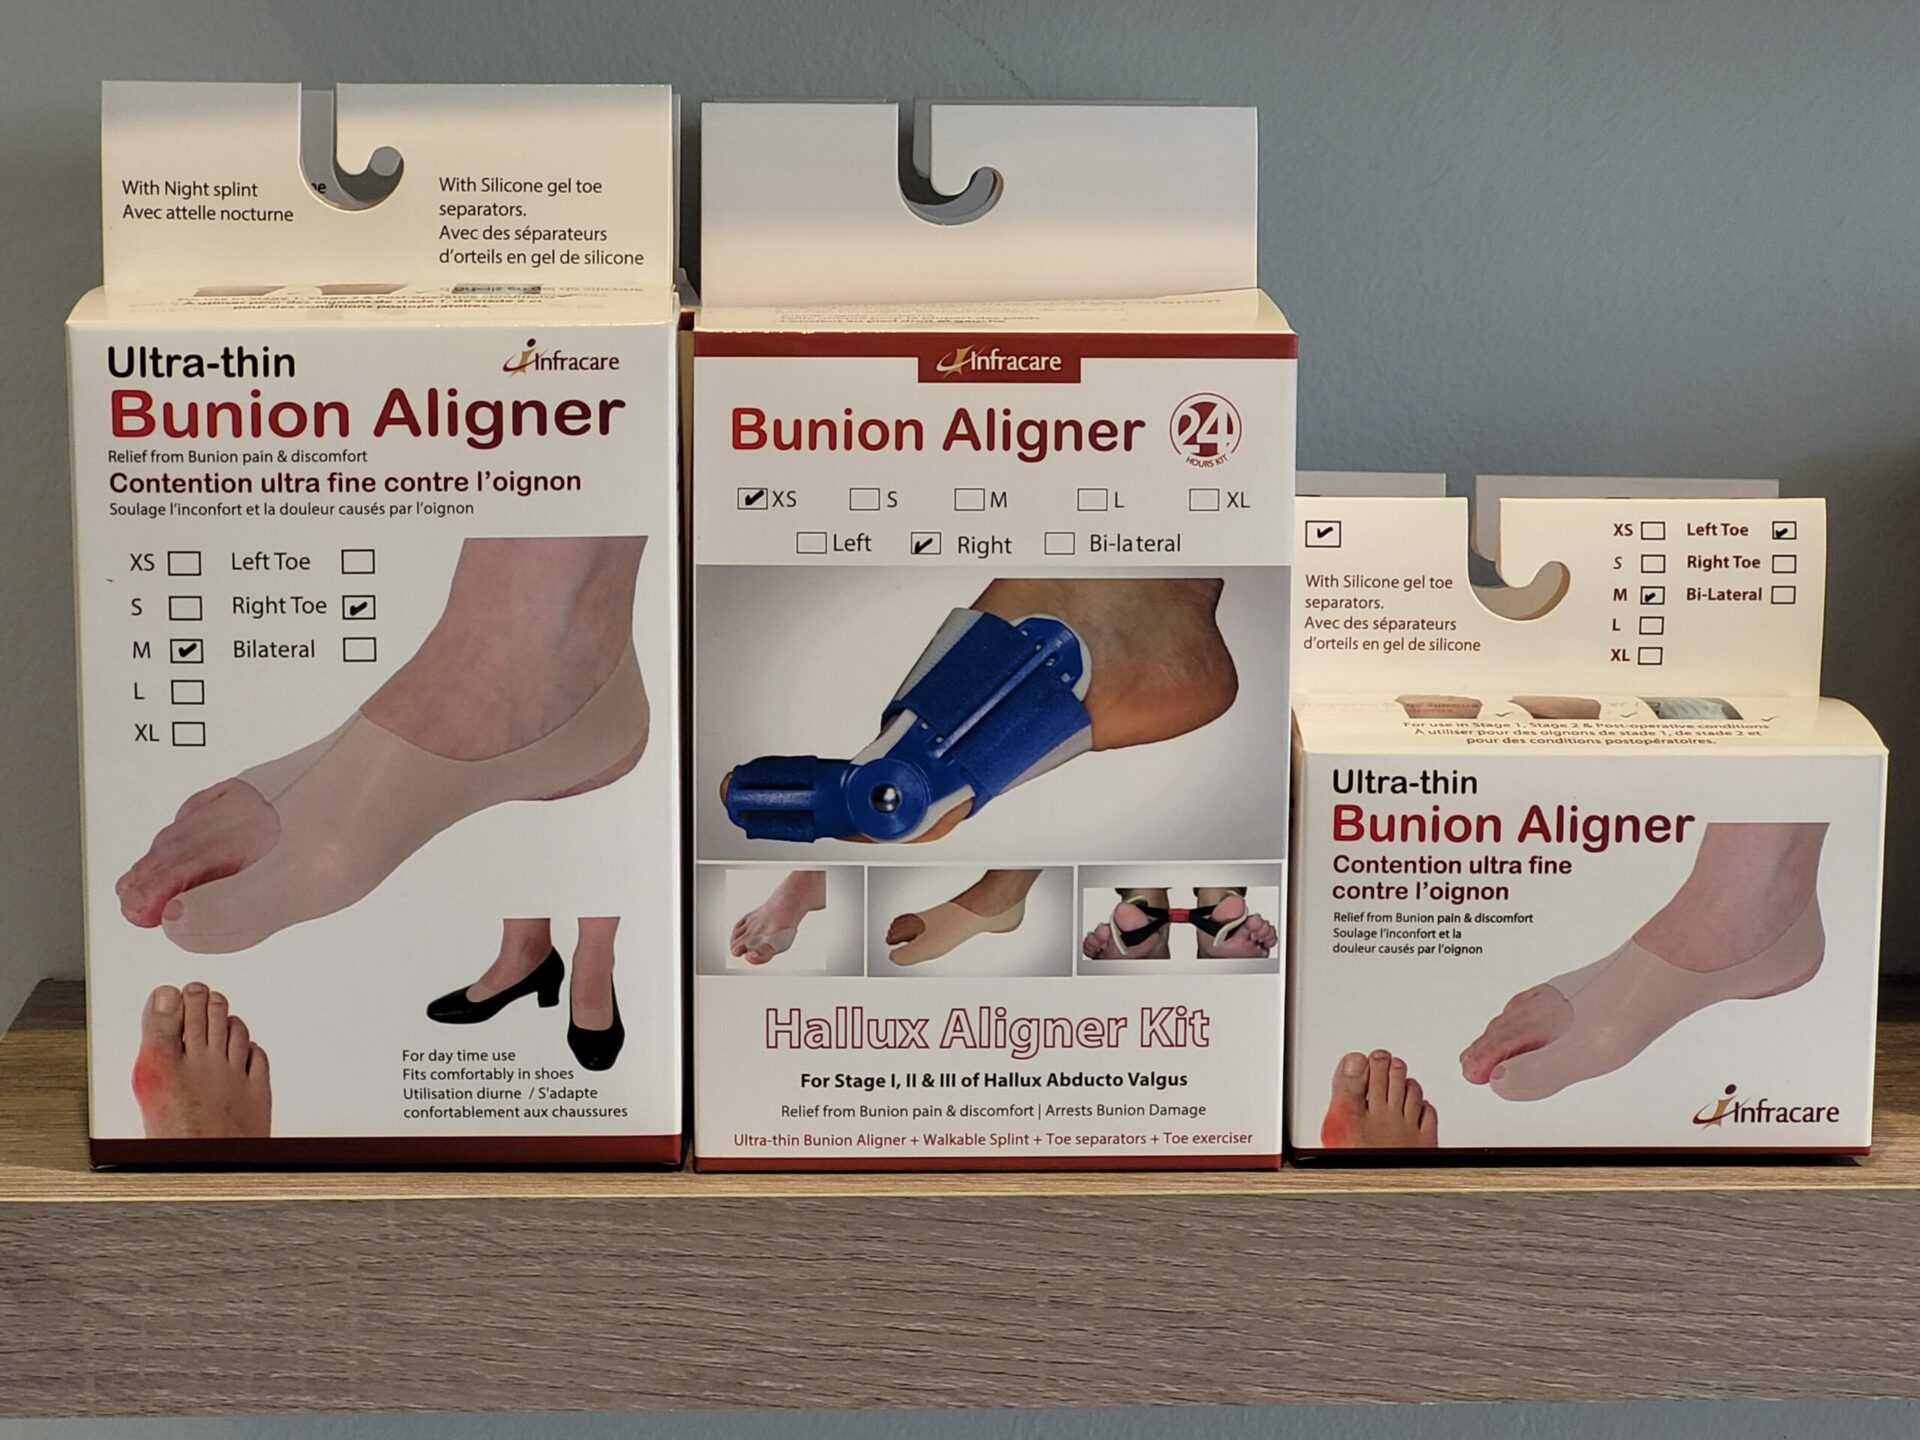 Bunion aligners can help treat bunions. Close up of bunion products.